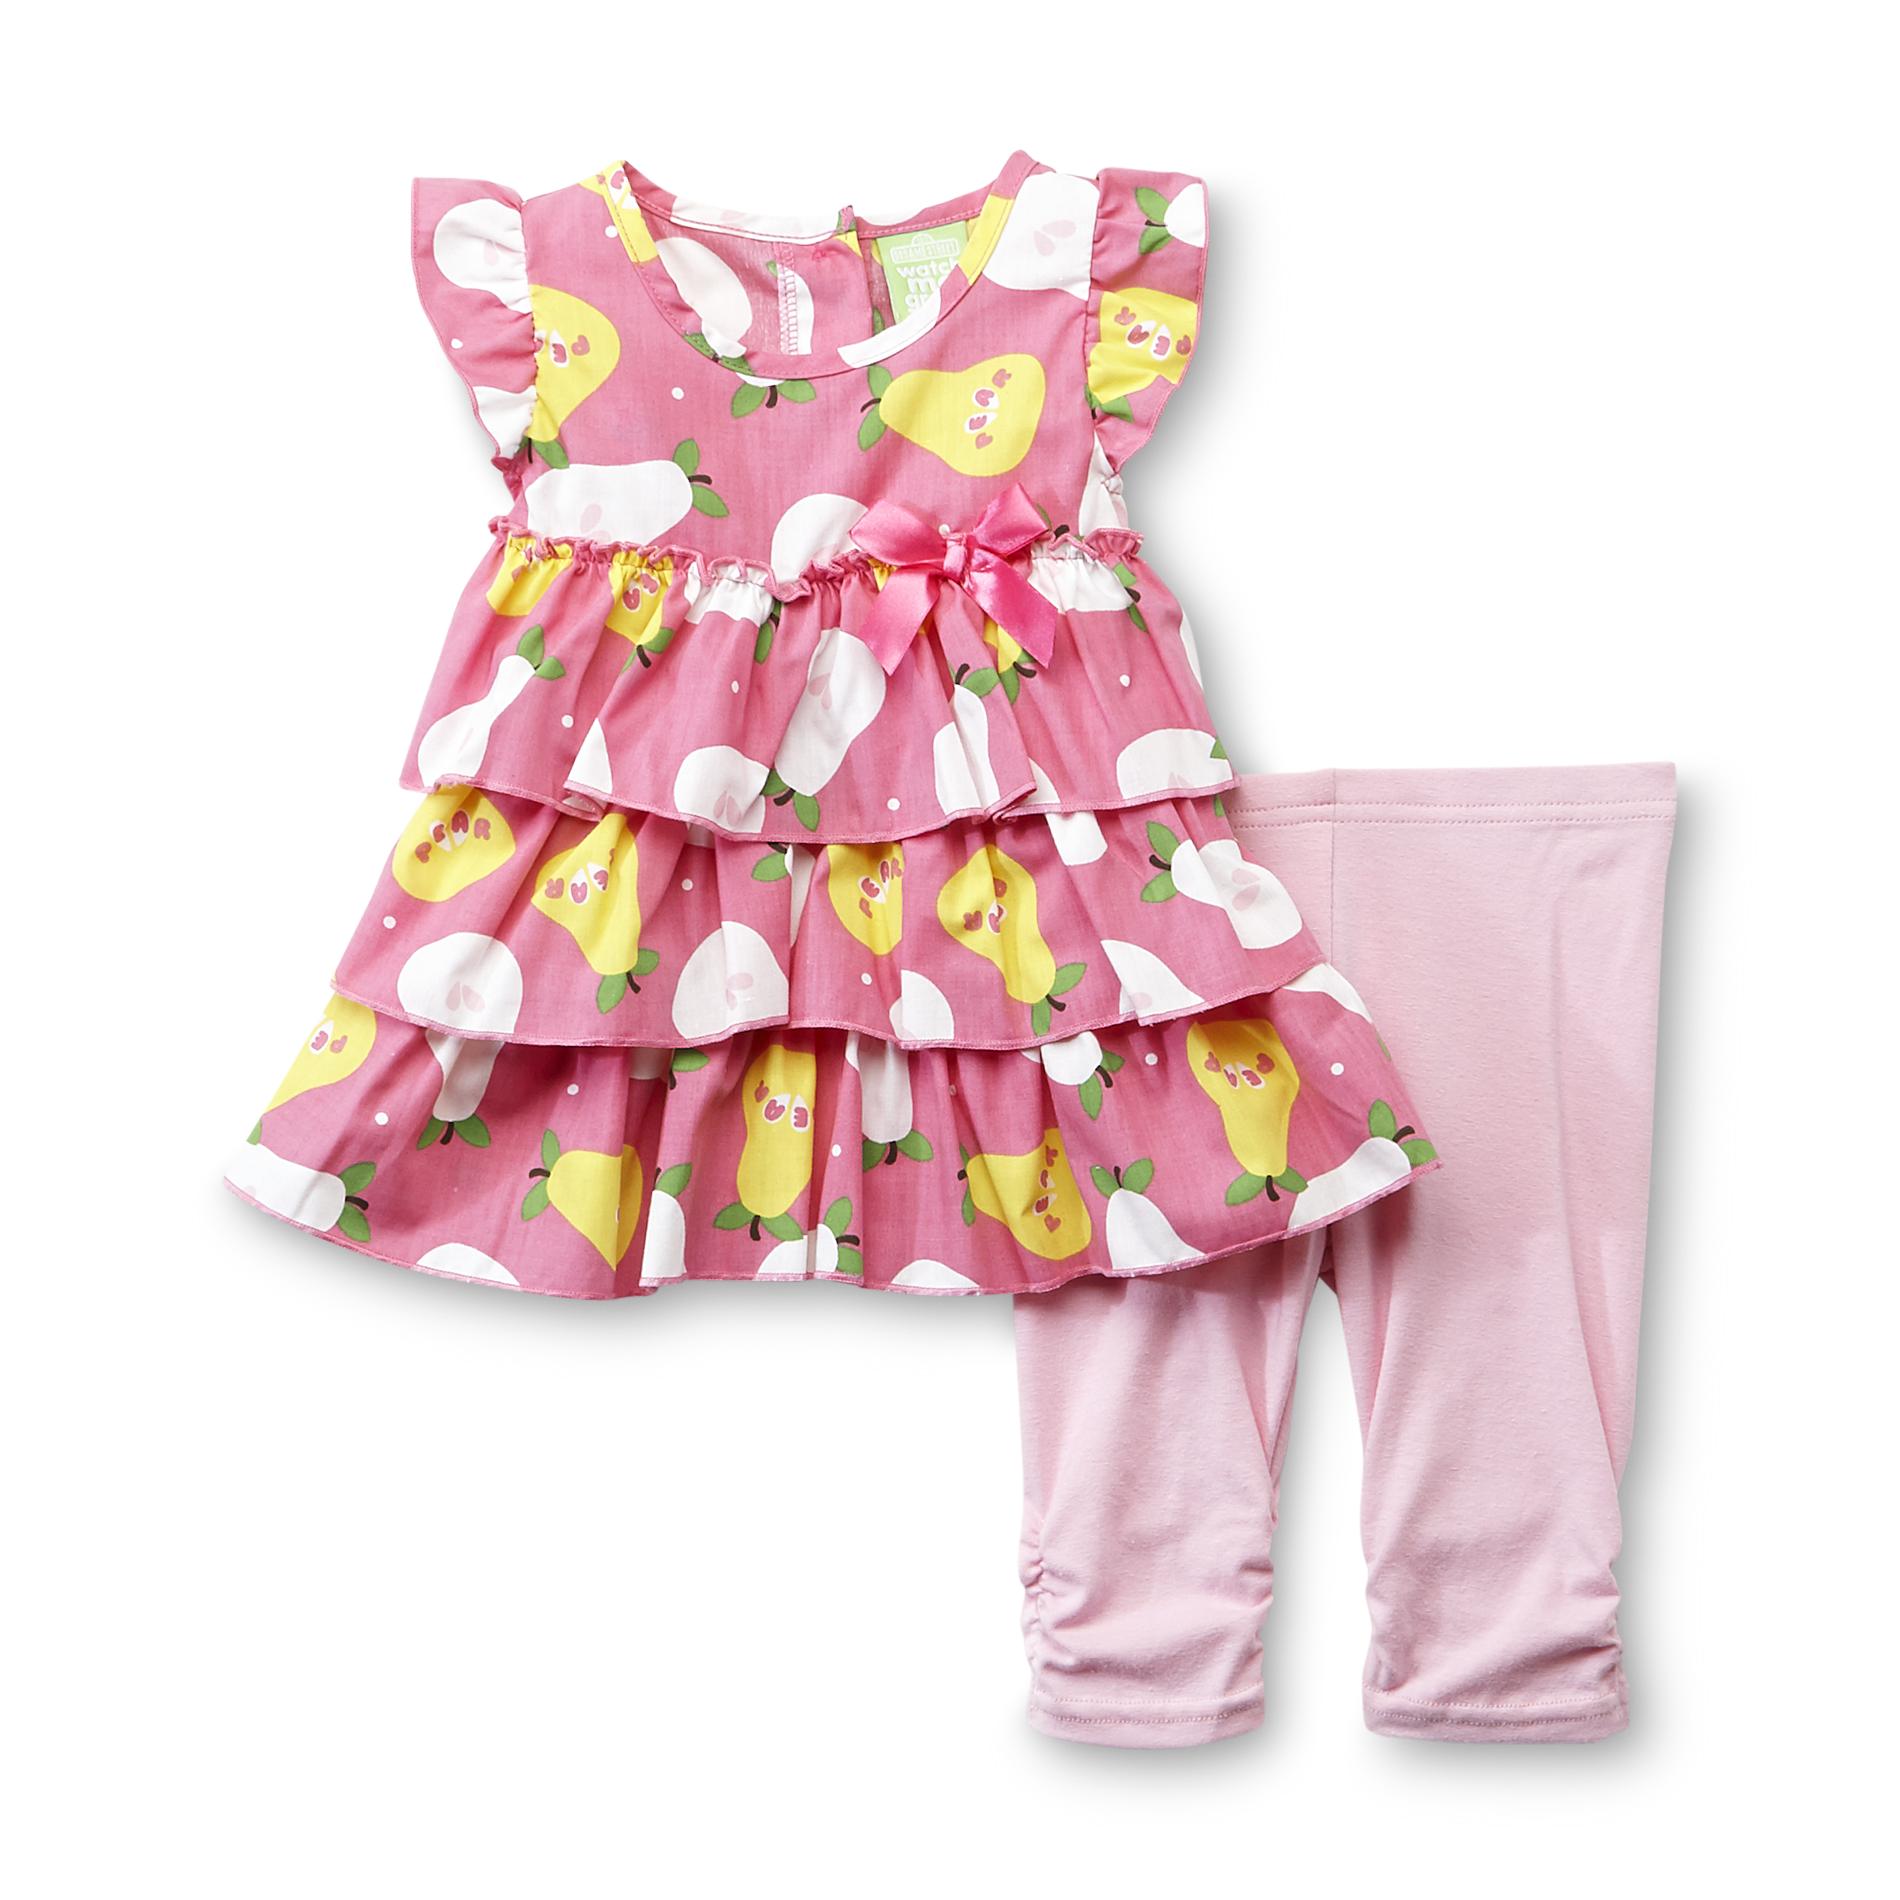 WATCH ME GROW Infant Girl's Tiered Woven Top & Leggings - Pears